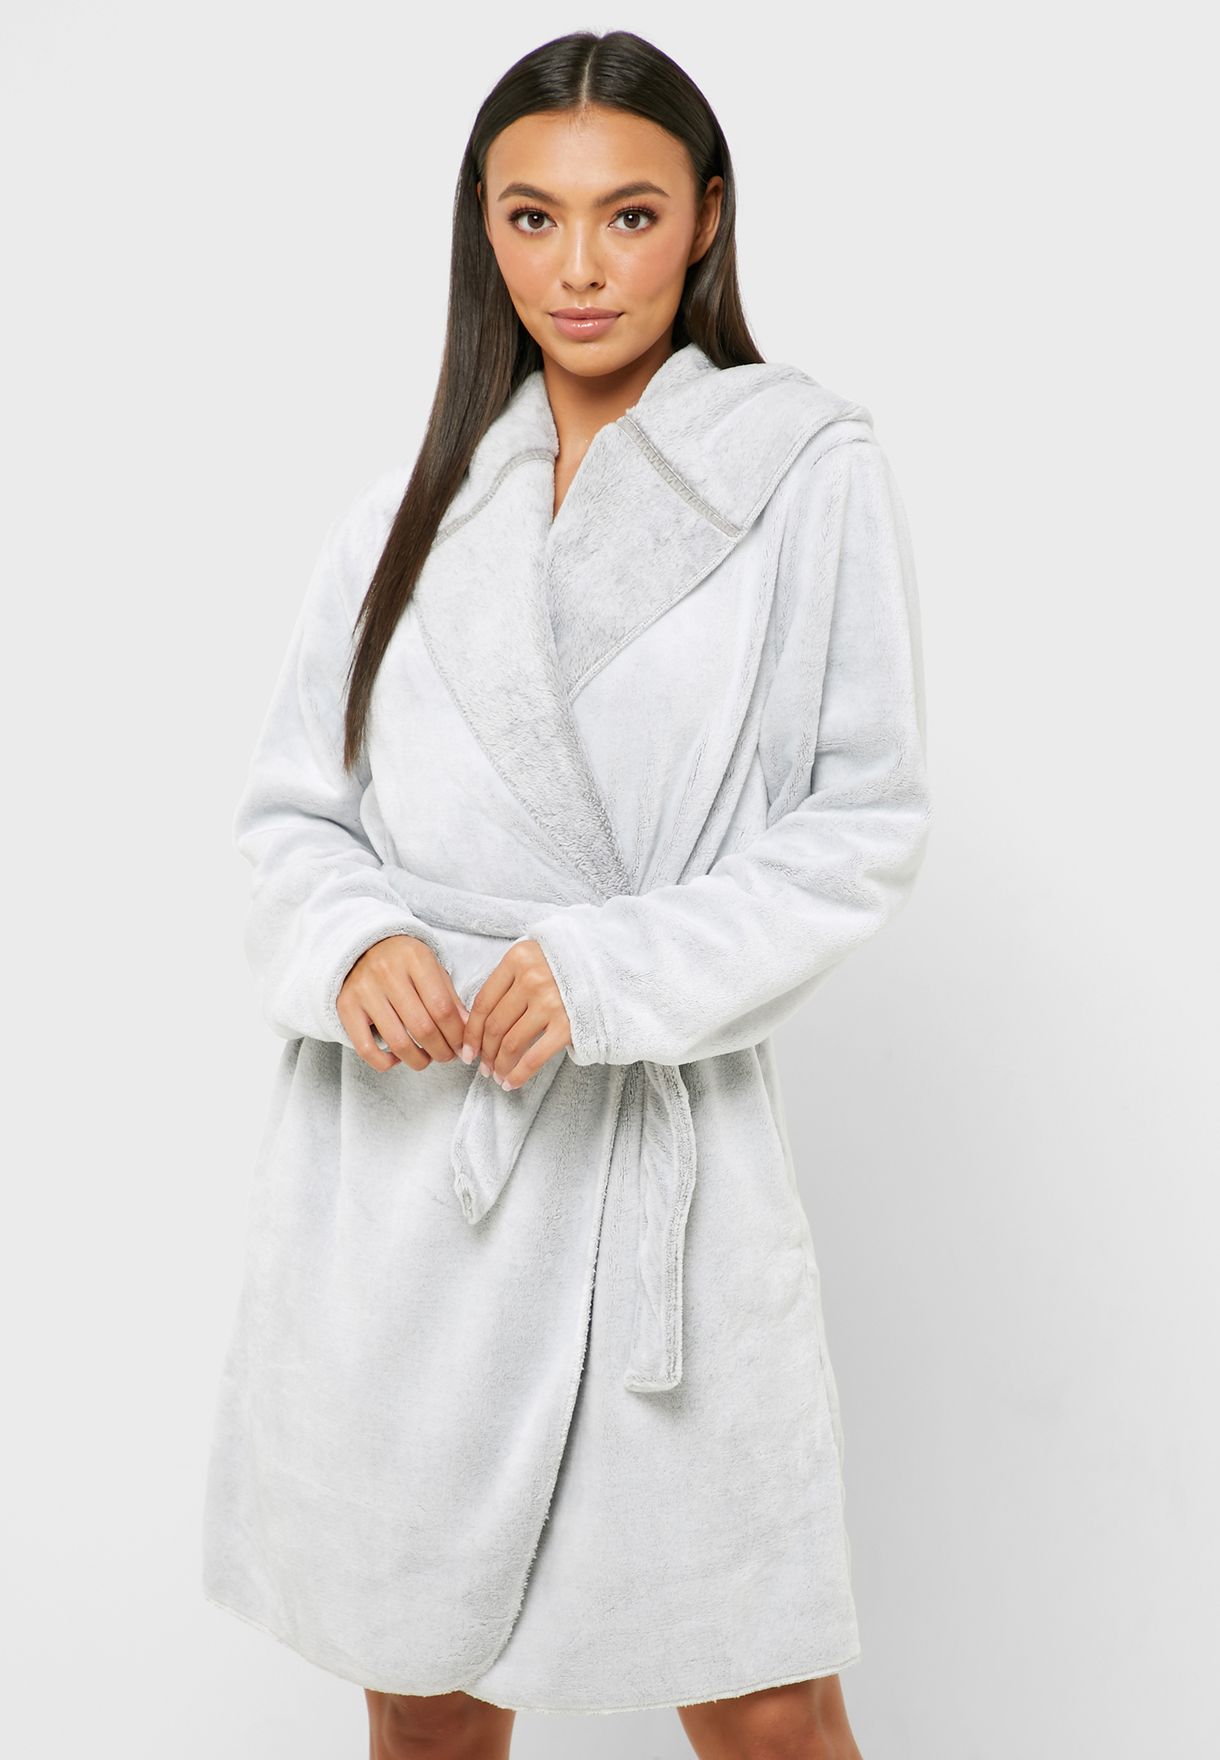 Boux Avenue Womens Hooded Waterfall Robe Dressing Gown